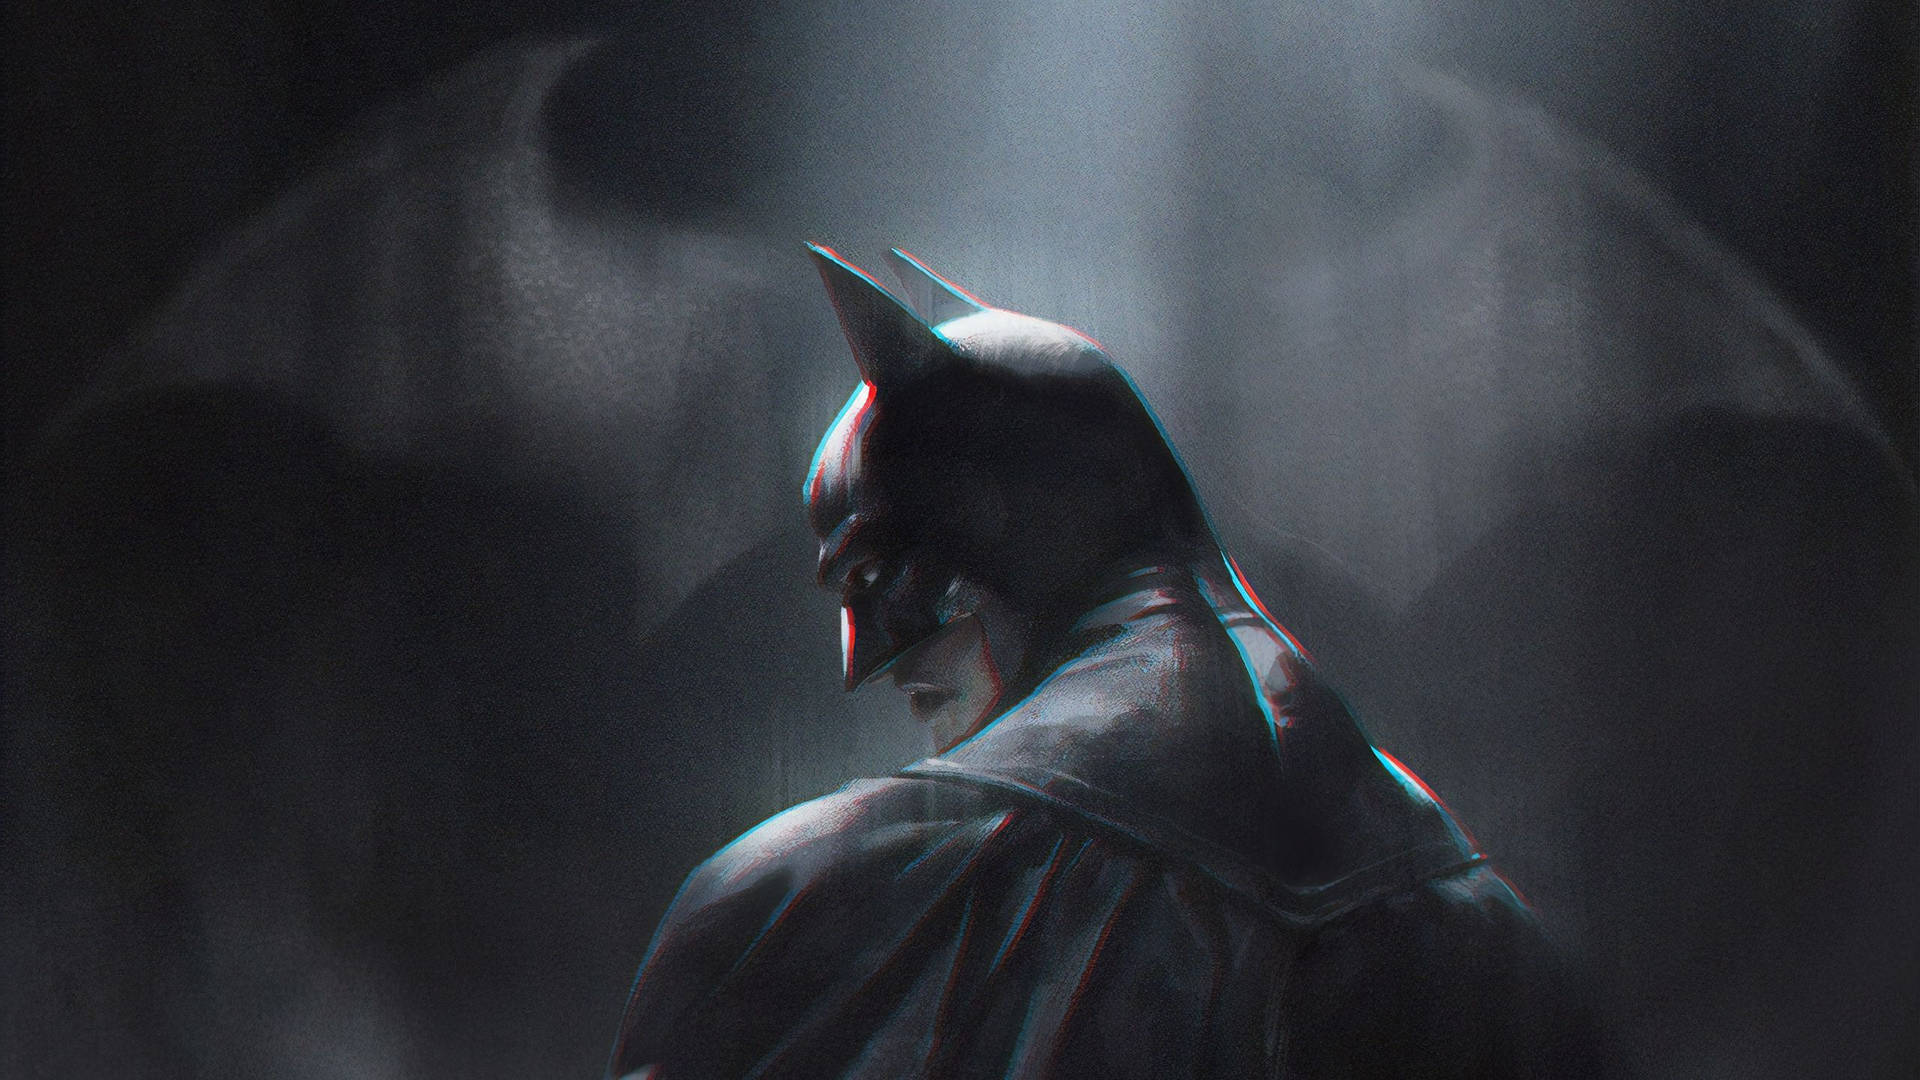 Image  Dressed in His Classic Suit, Batman is Ready for Action Wallpaper